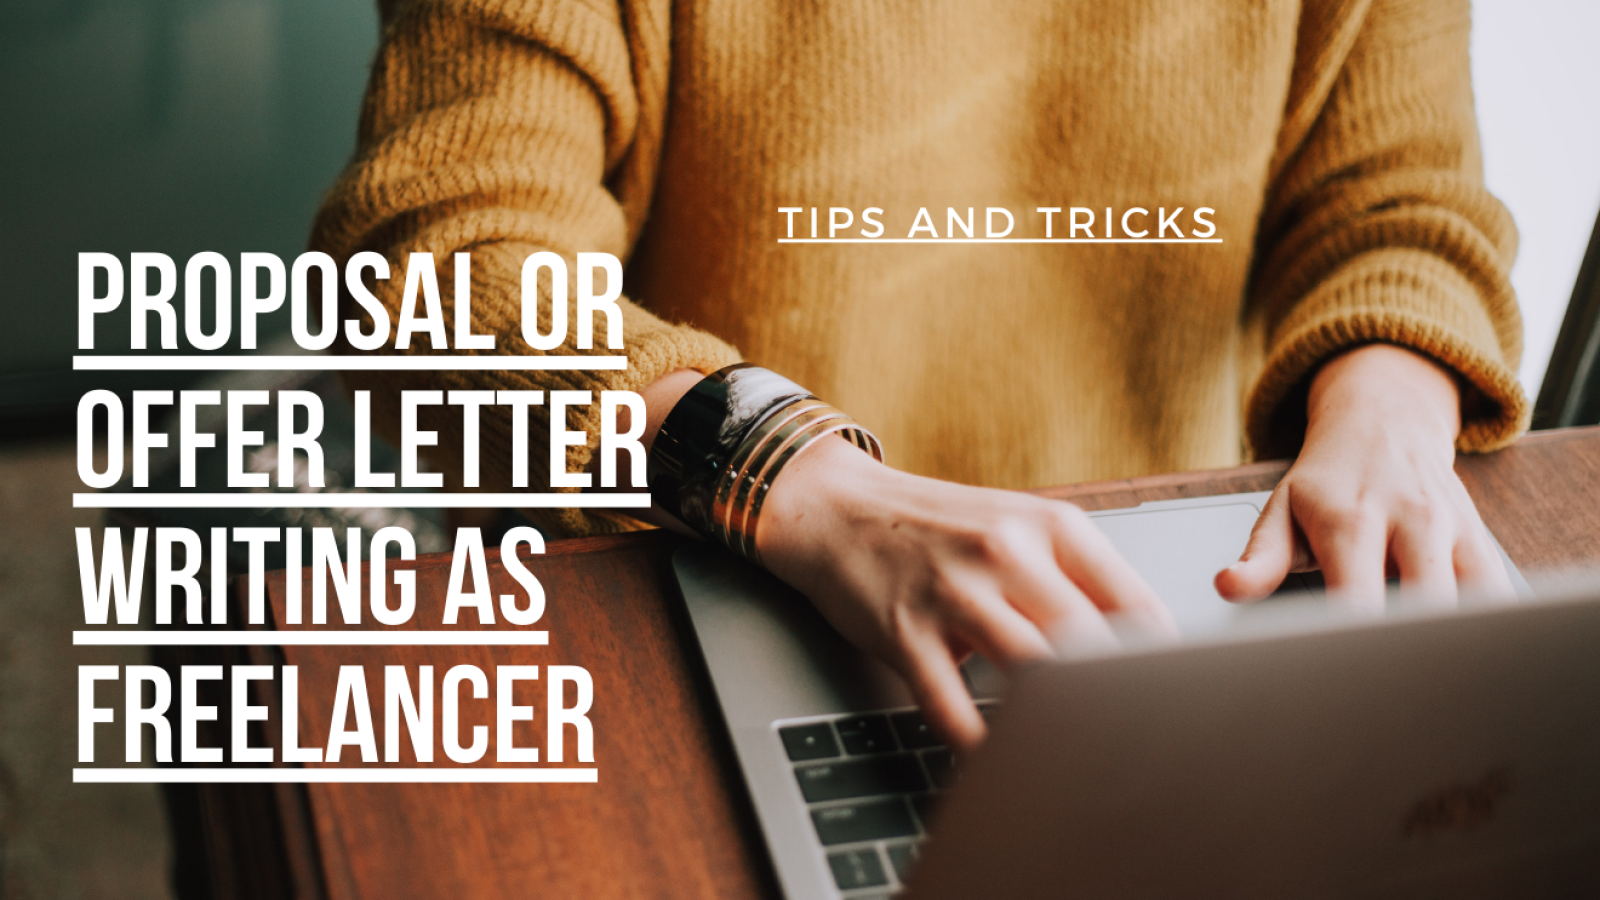 Proposal or Offer Letter Writing as Freelancer - Tips and Tricks